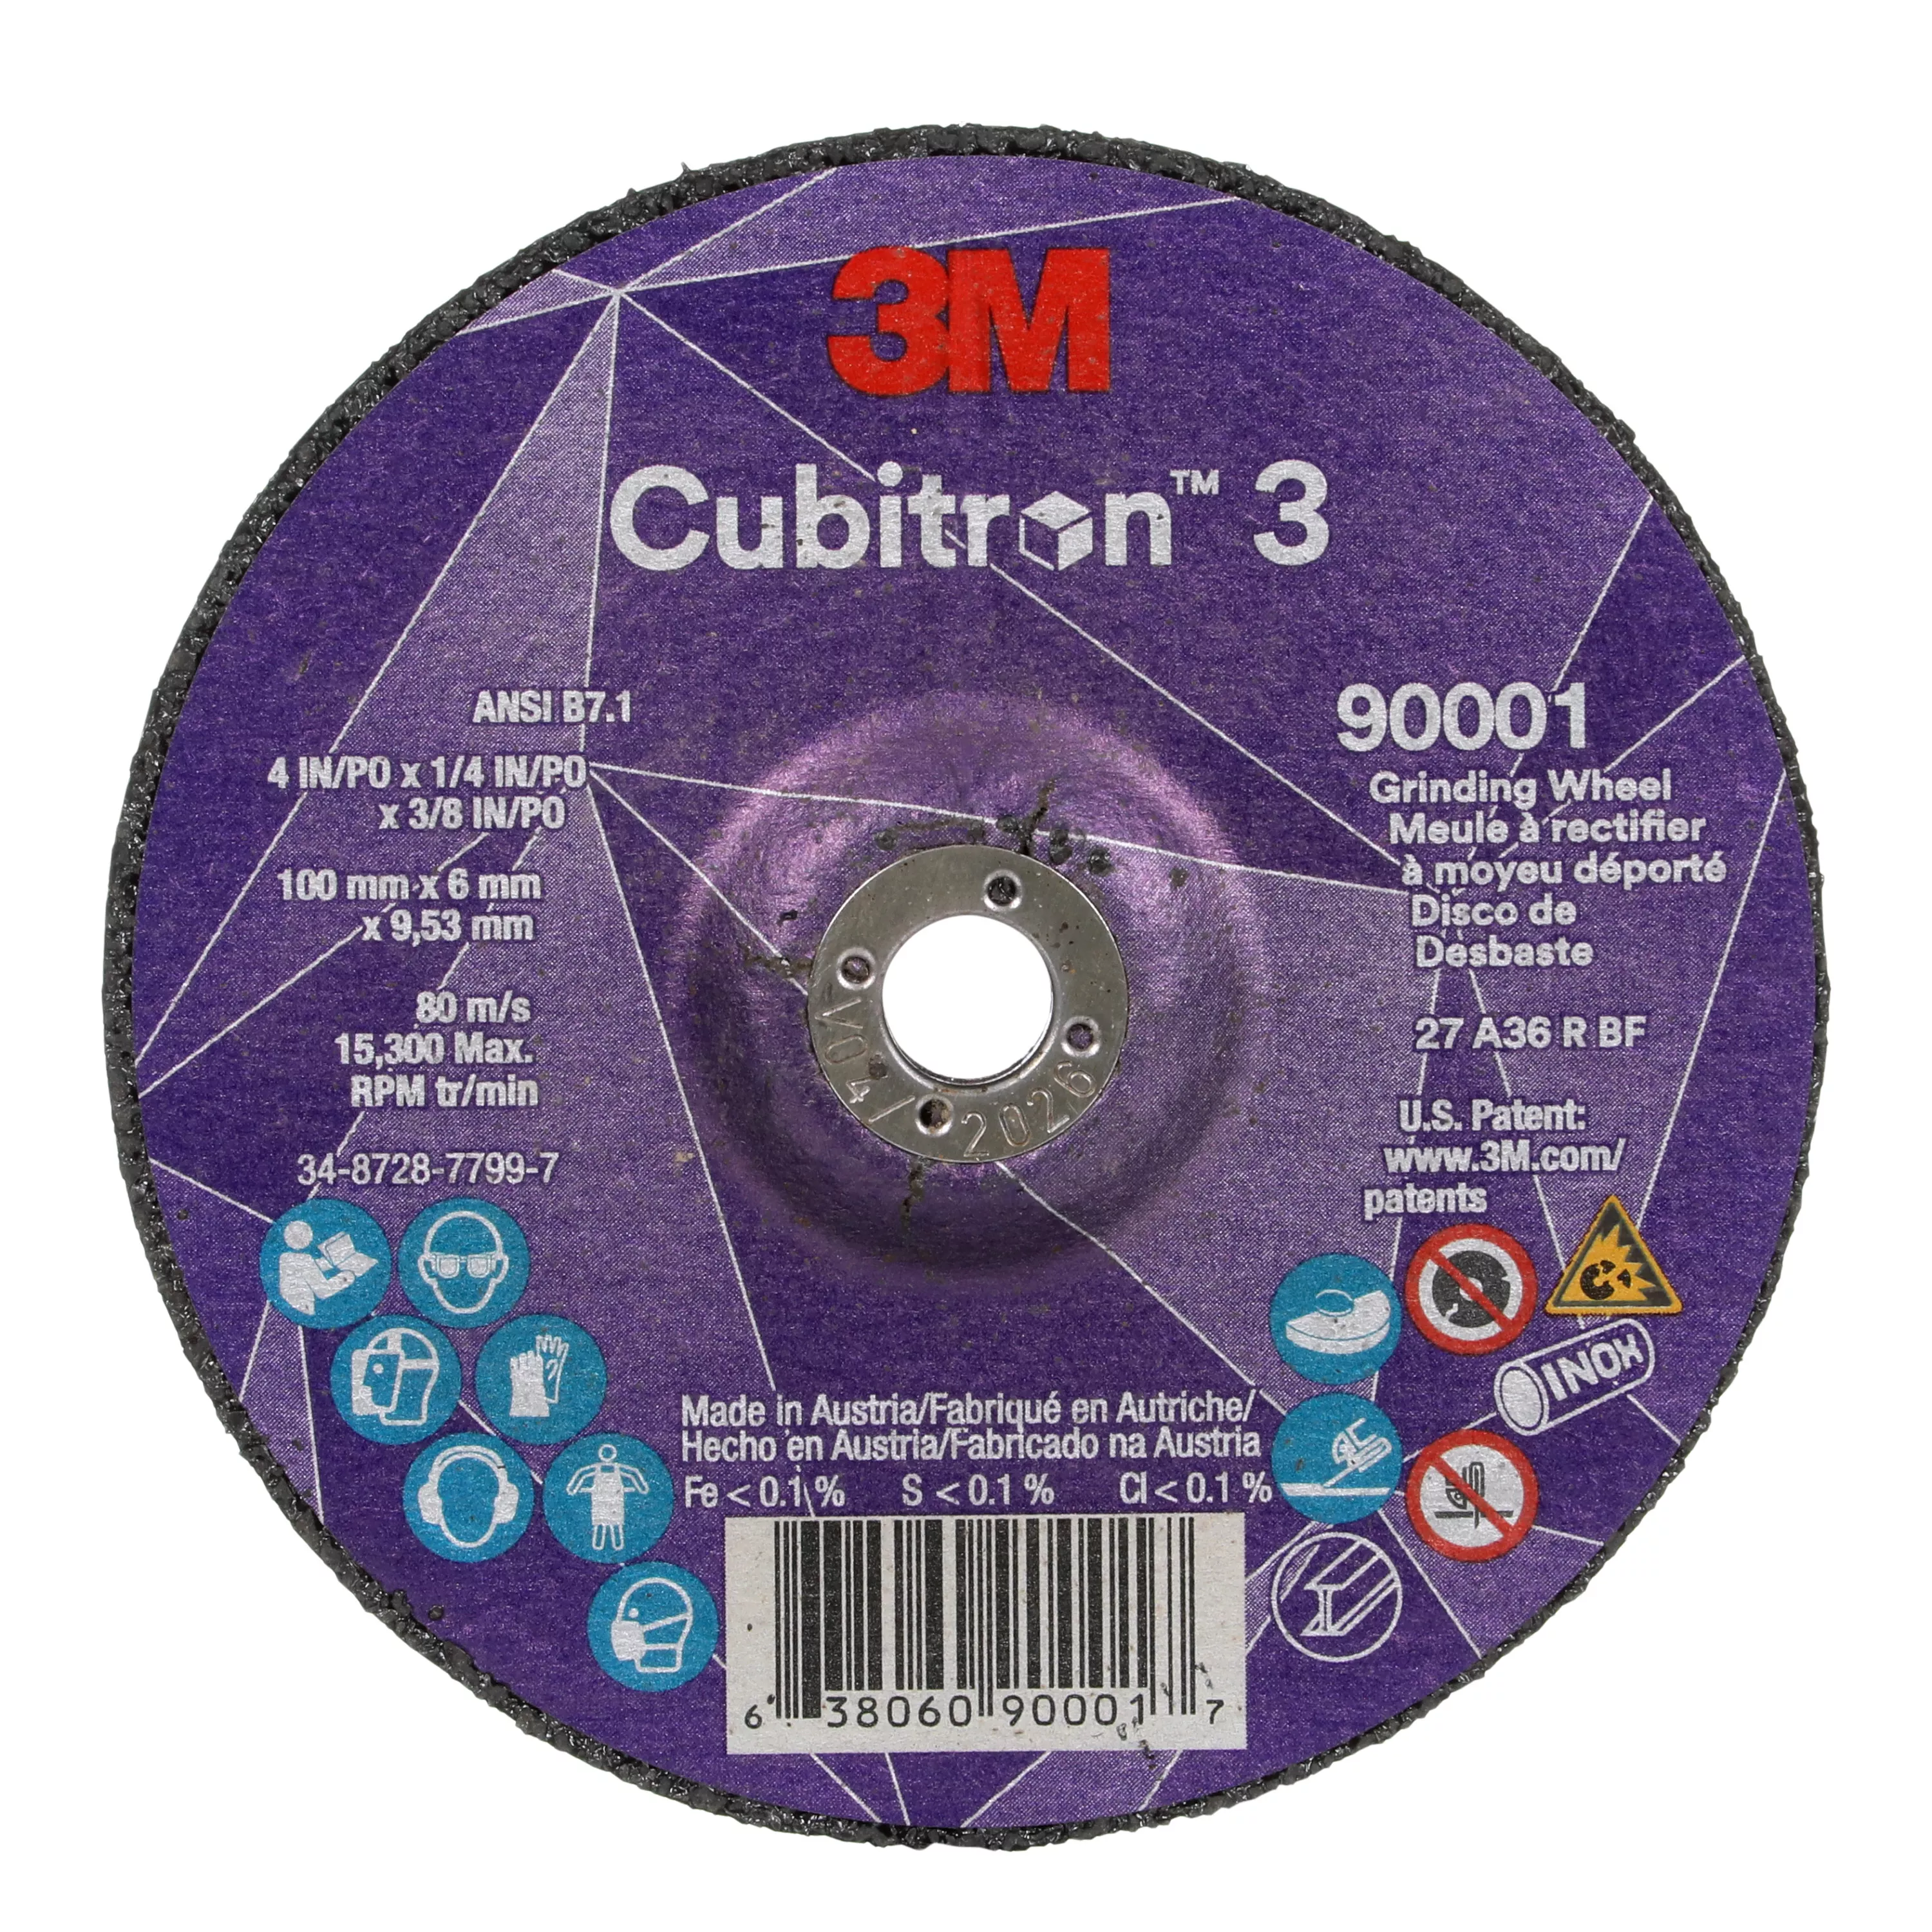 3M™ Cubitron™ 3 Depressed Center Grinding Wheel, 90001, 36+, T27, 4 in x
1/4 in x 3/8 in (100x6x9.53mm), ANSI, 10/Pack, 20 ea/Case